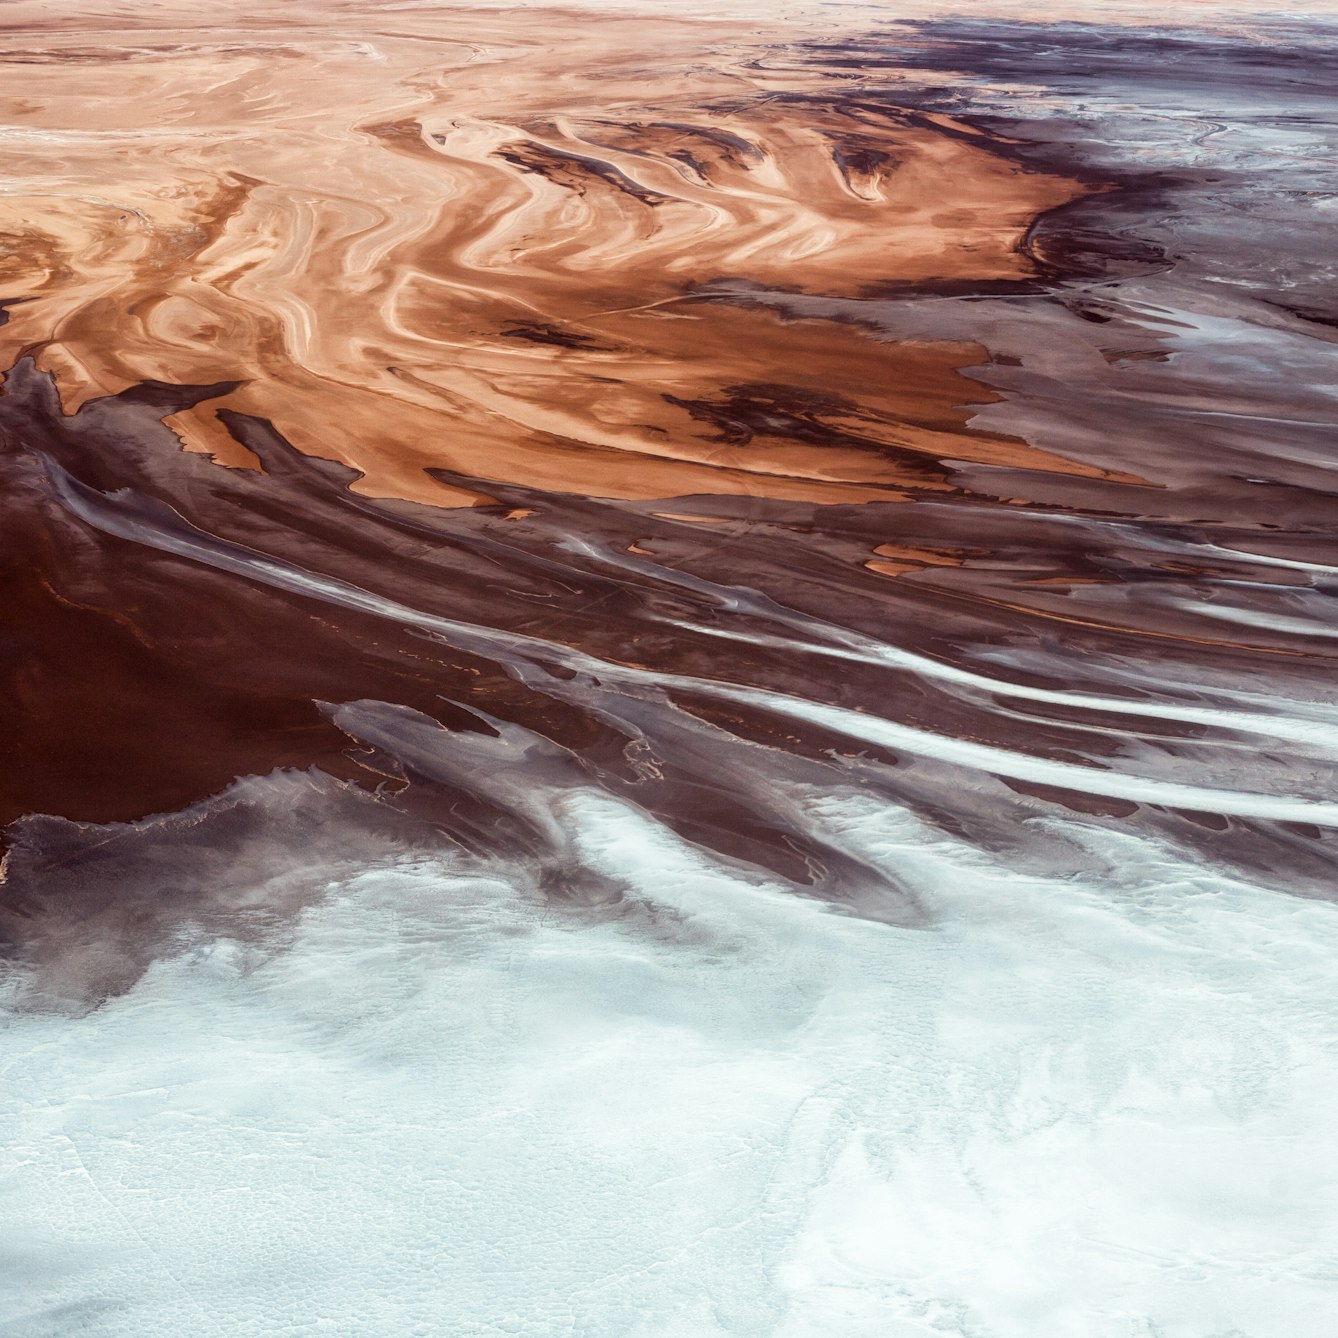 Aerial colour photograph showing the mineral formations at the edges of the salt flats along the Rio Grande delta in Bolivia. The image is abstract in nature making it difficult to get a sense of scale. The overall tones are a brown, red, rust colour with expanses of white. The brown starts in the top left corner swirling in patterns of differing hues across towards the bottom right corner of the image. Half way across this diagonal, the brown begins to mix with the white, merging with long swirling strands, until eventually arriving at the bottom of the image where they turn completely white with a blue green tint and grainy texture.